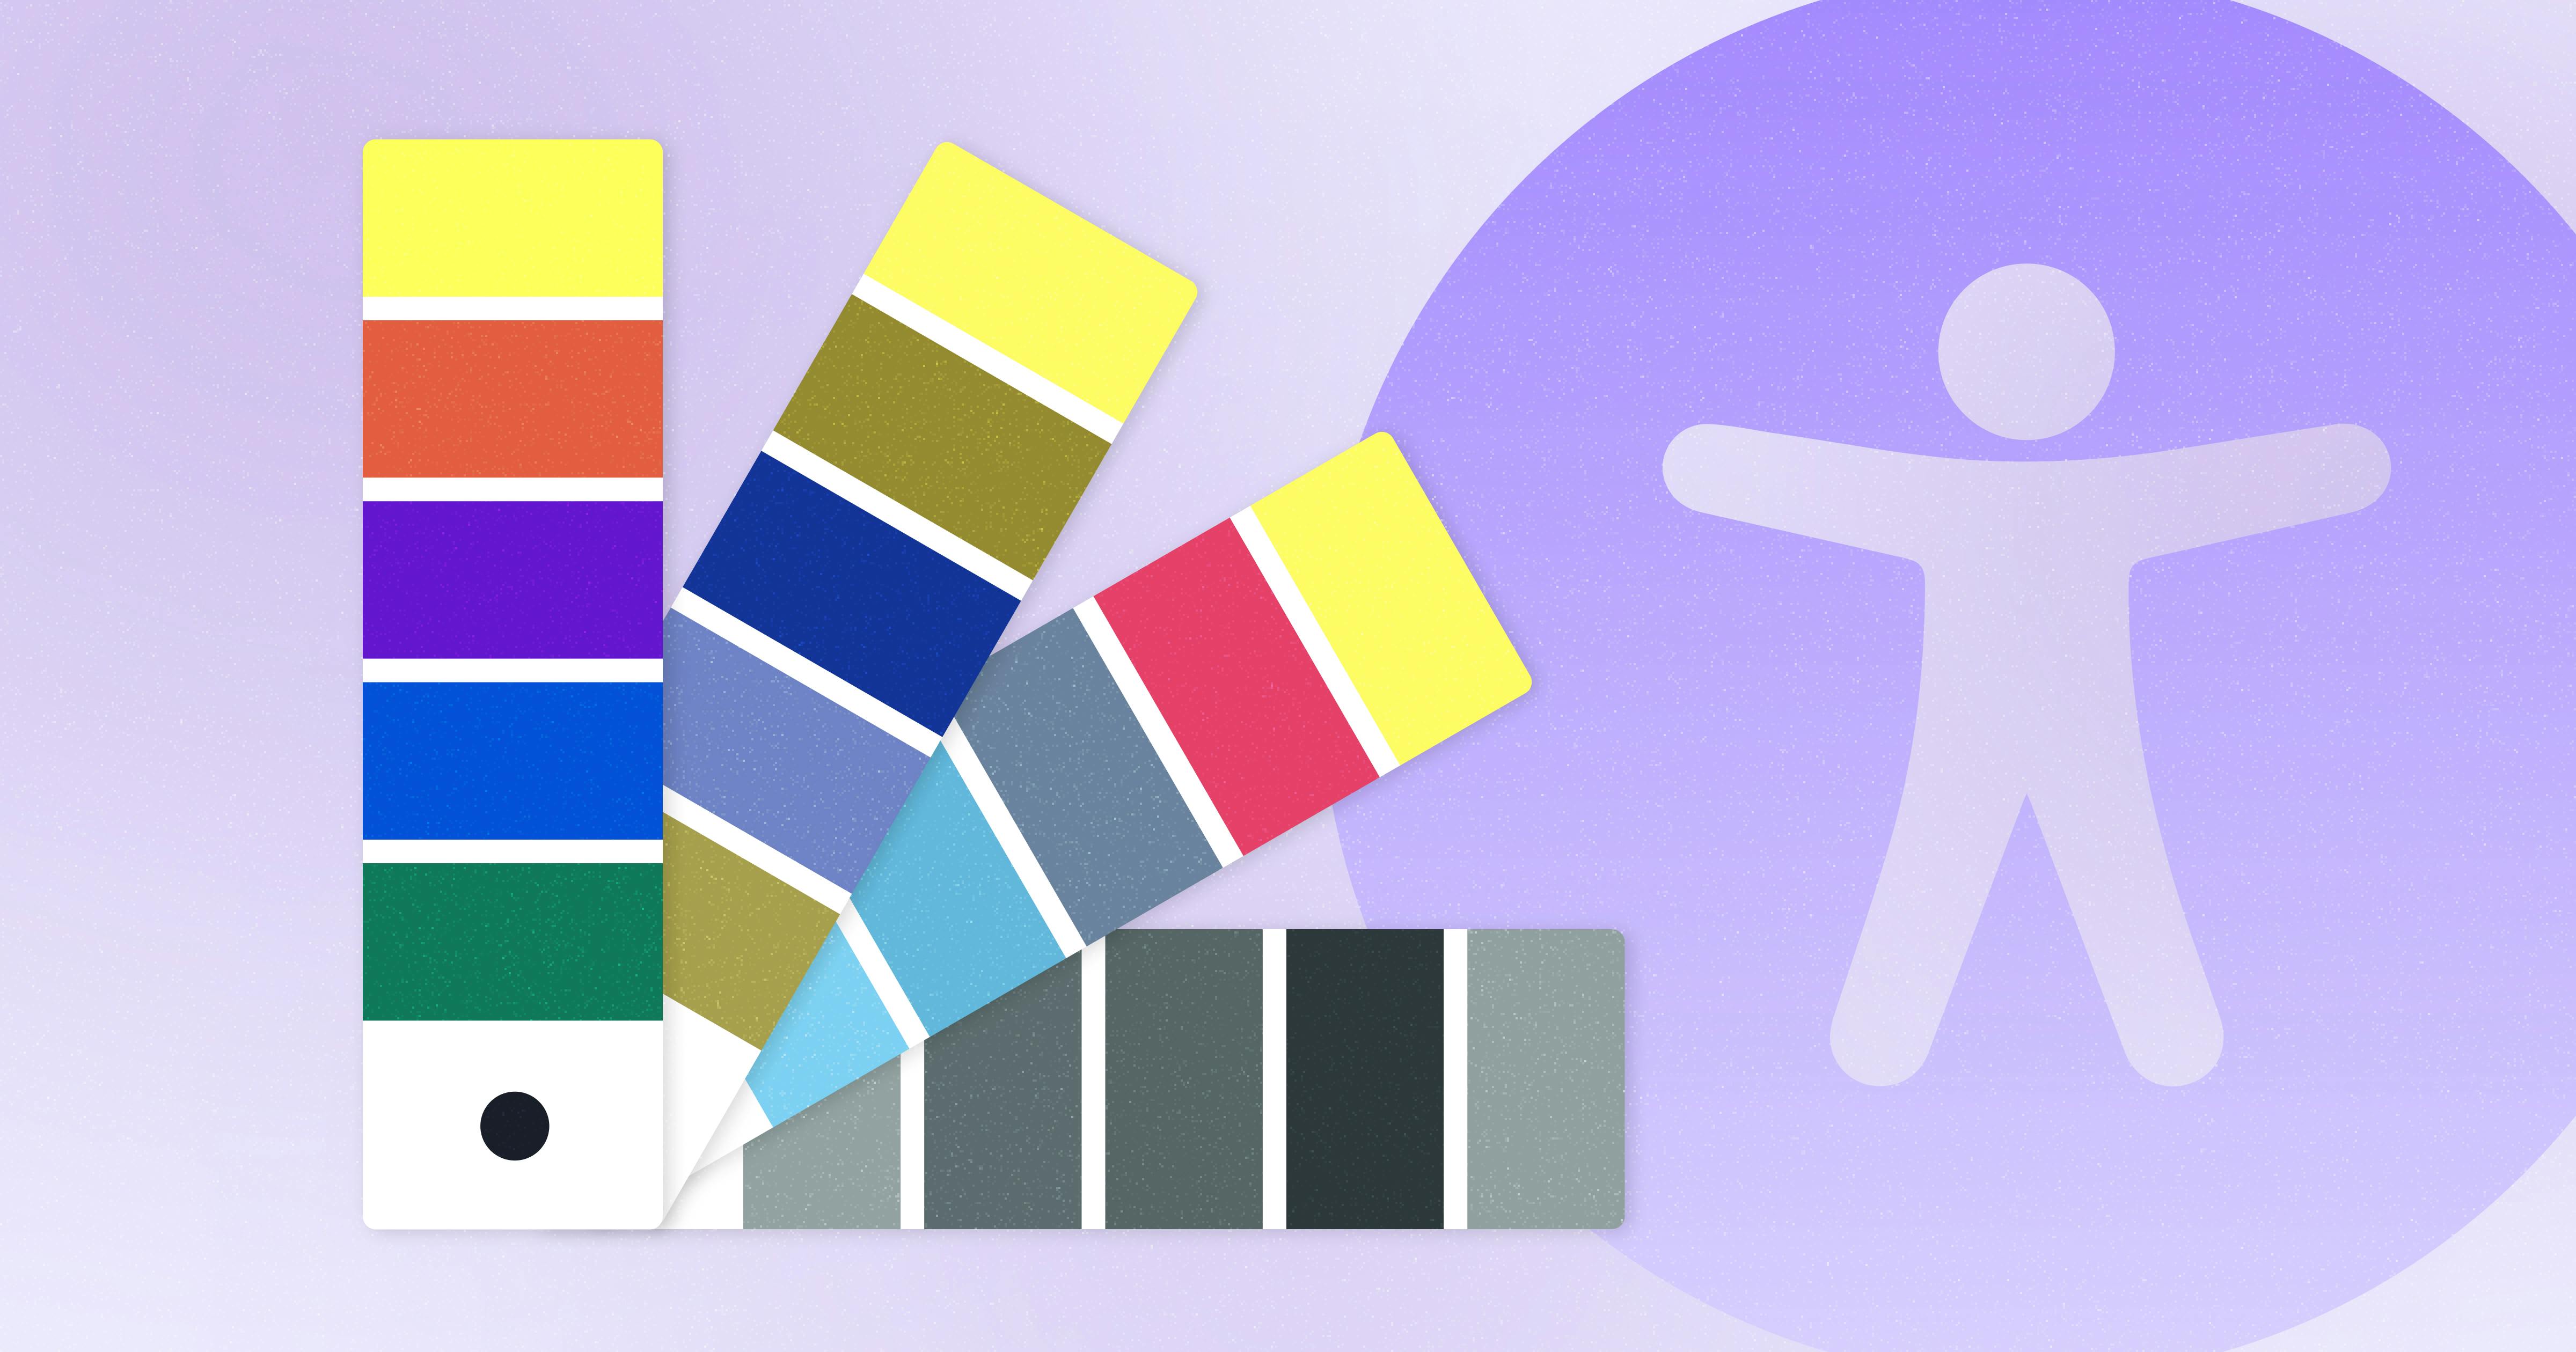 Four paint swatches with different color schemes fanned out next to an accessibility symbol.